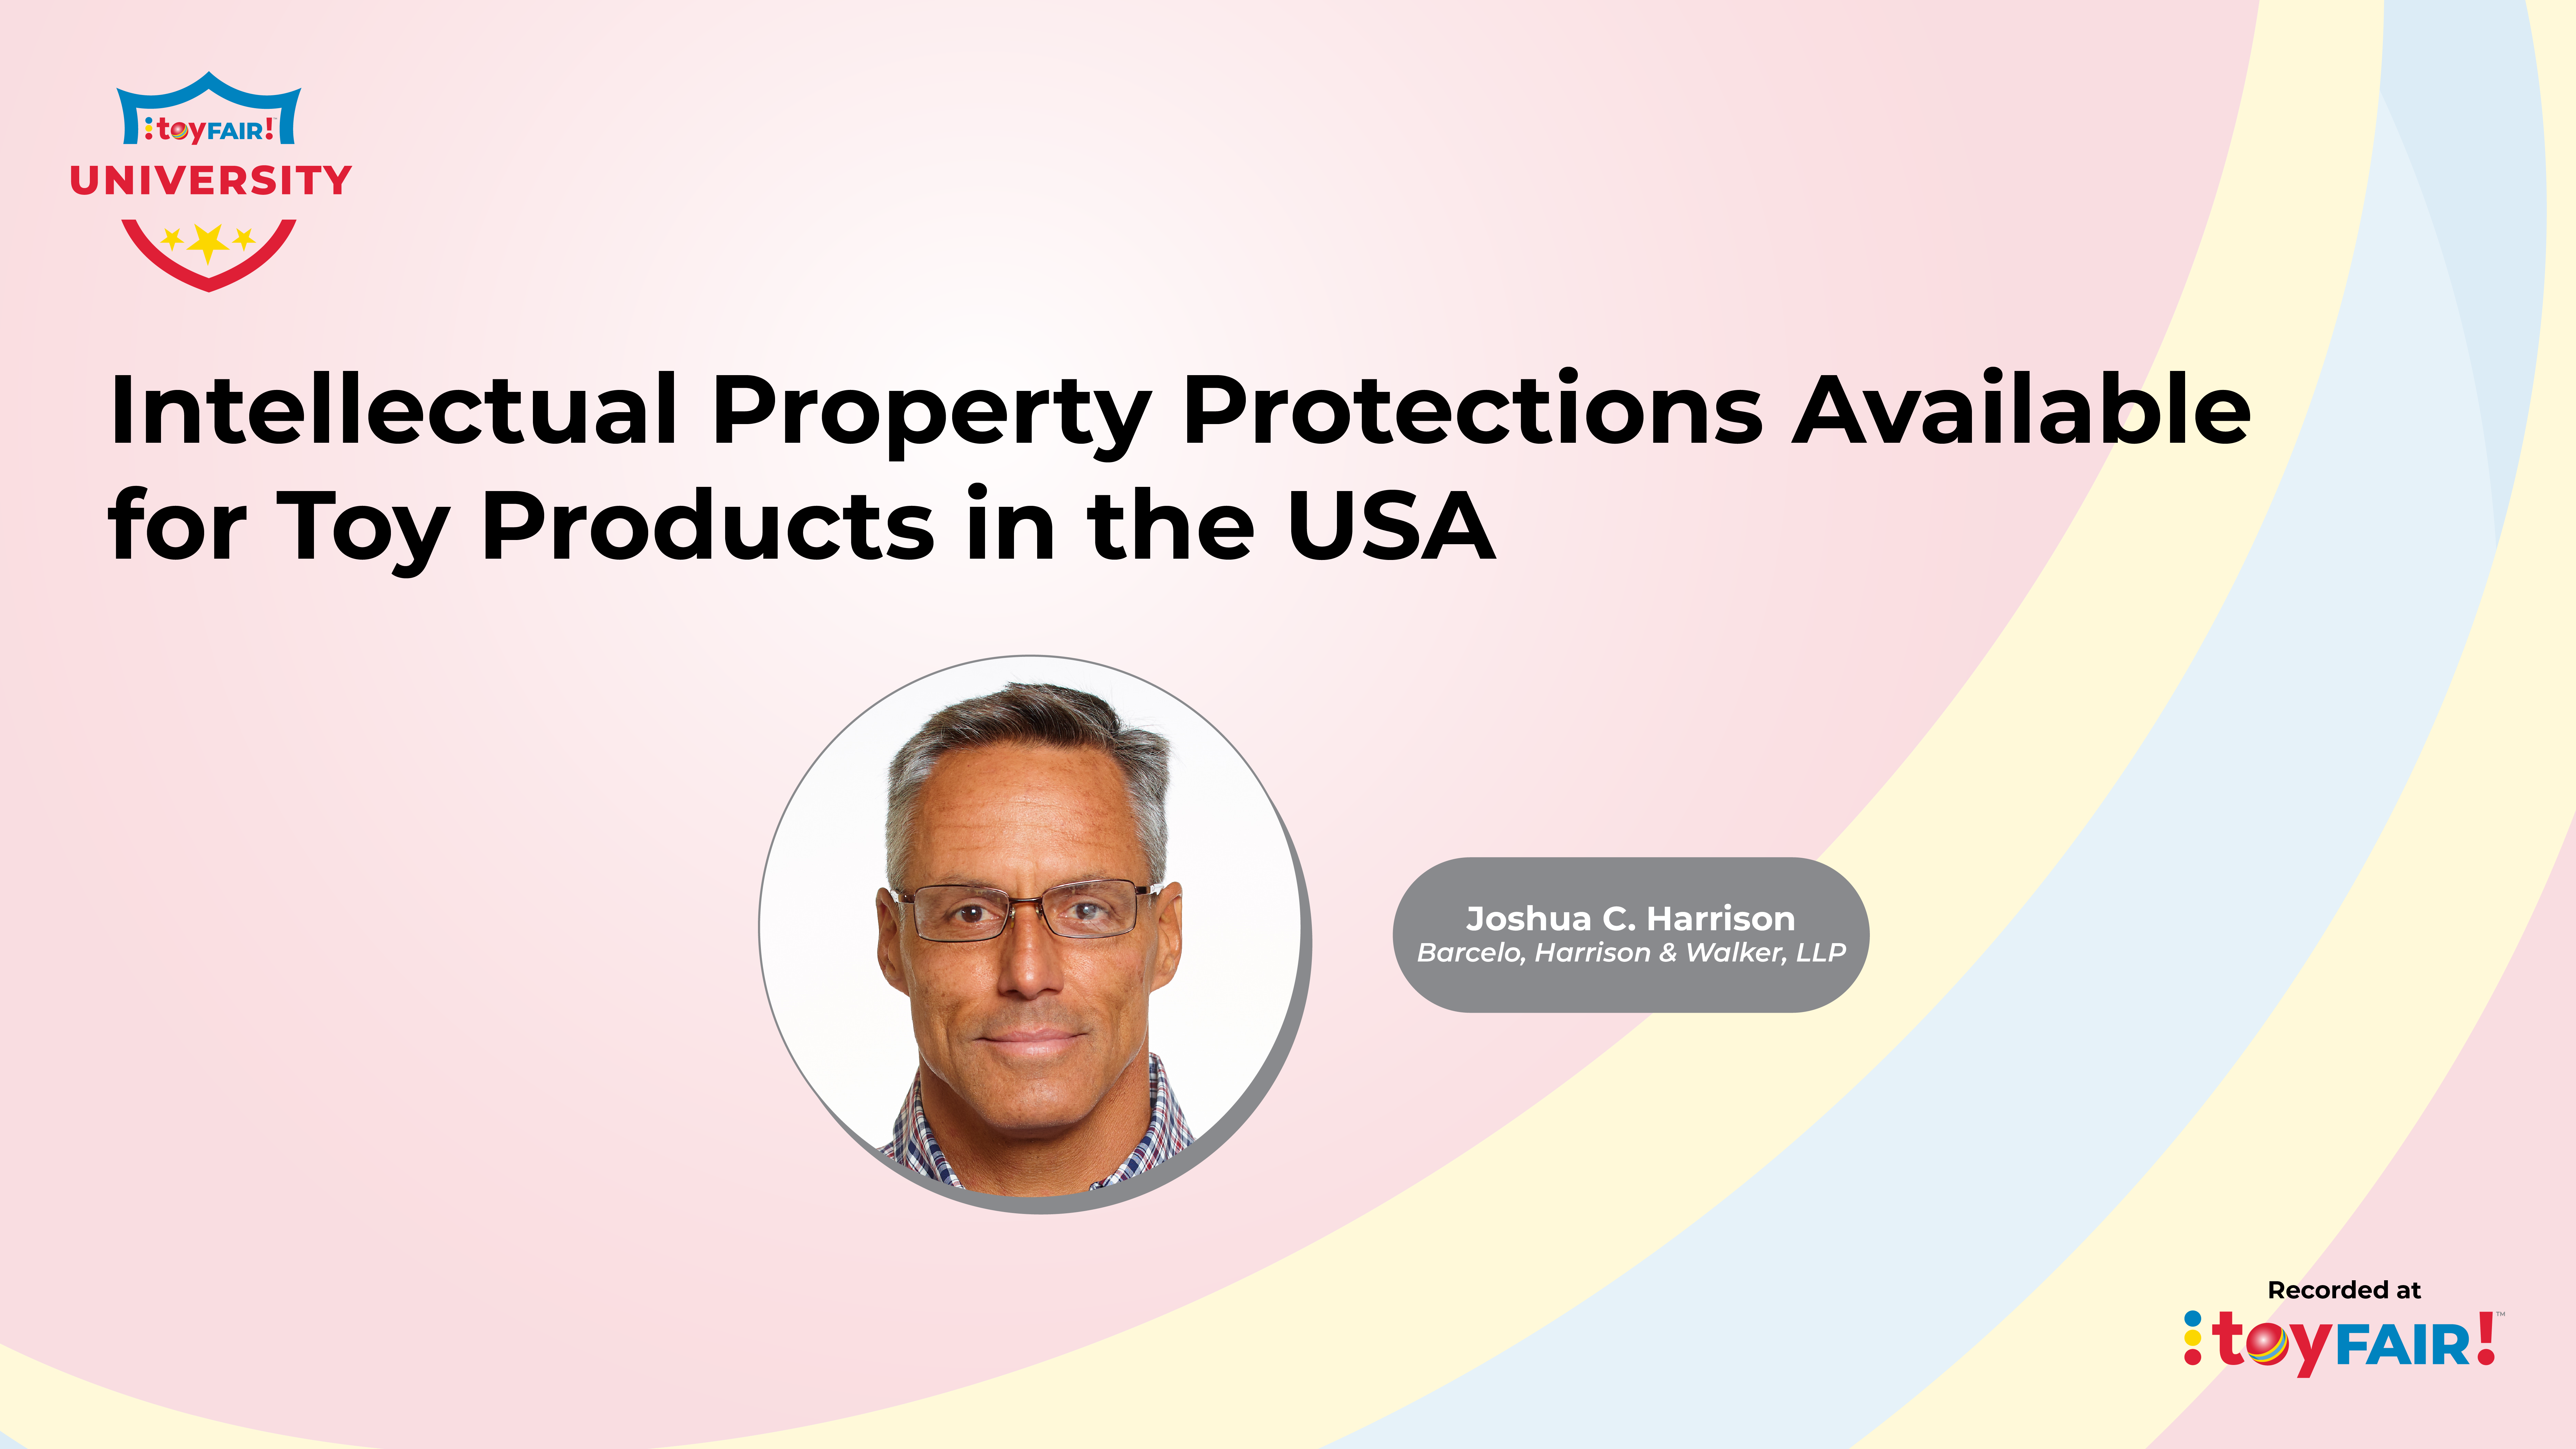 Intellectual Property Protections Available for Toy Products in the USA